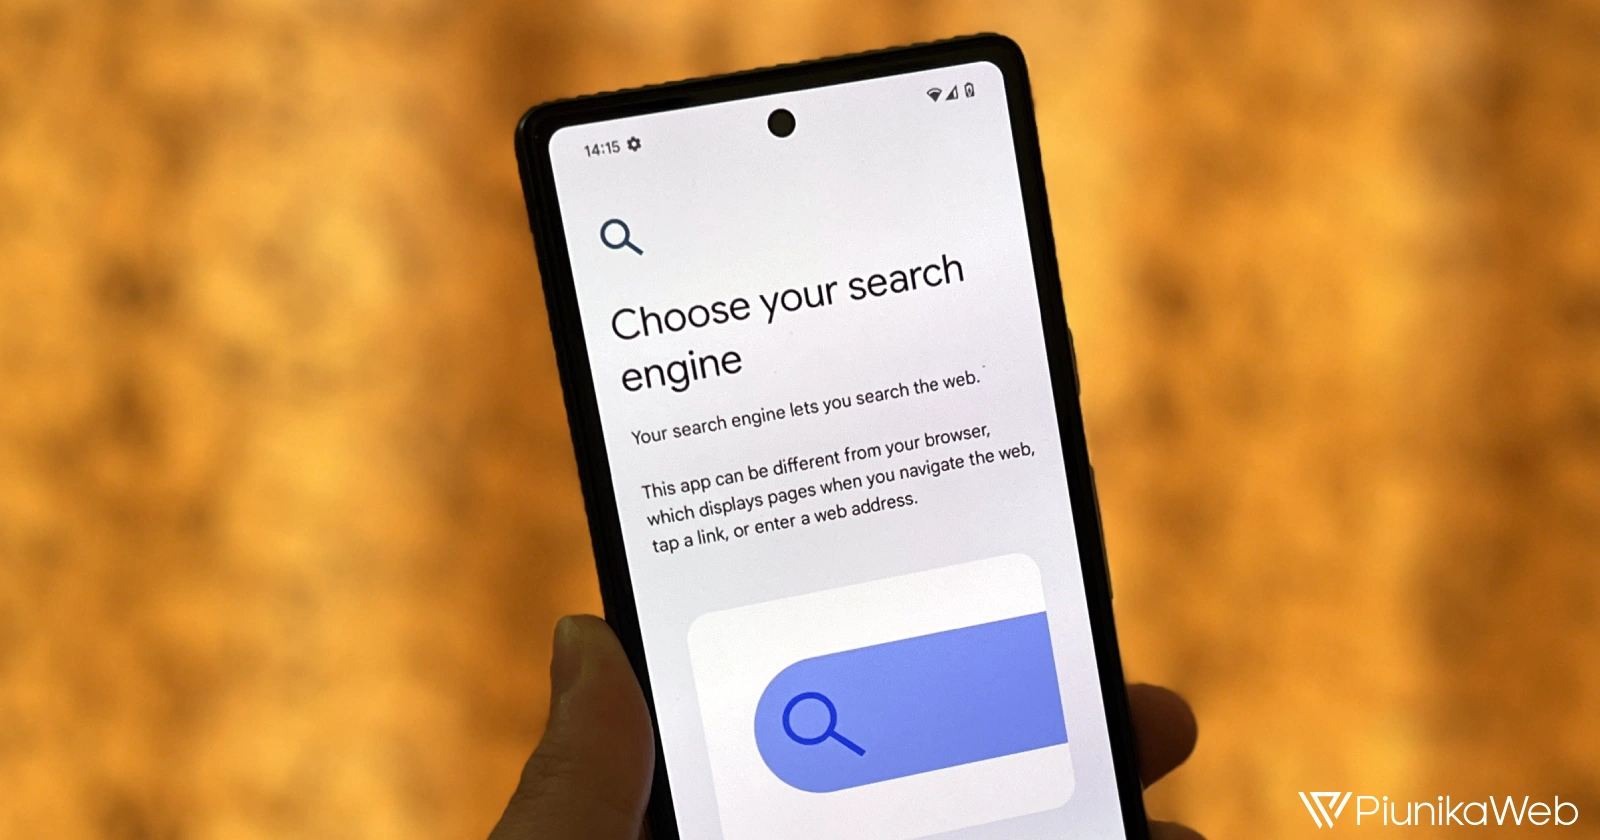 Google Pixel users in EU can now pick a different search engine in default launcher